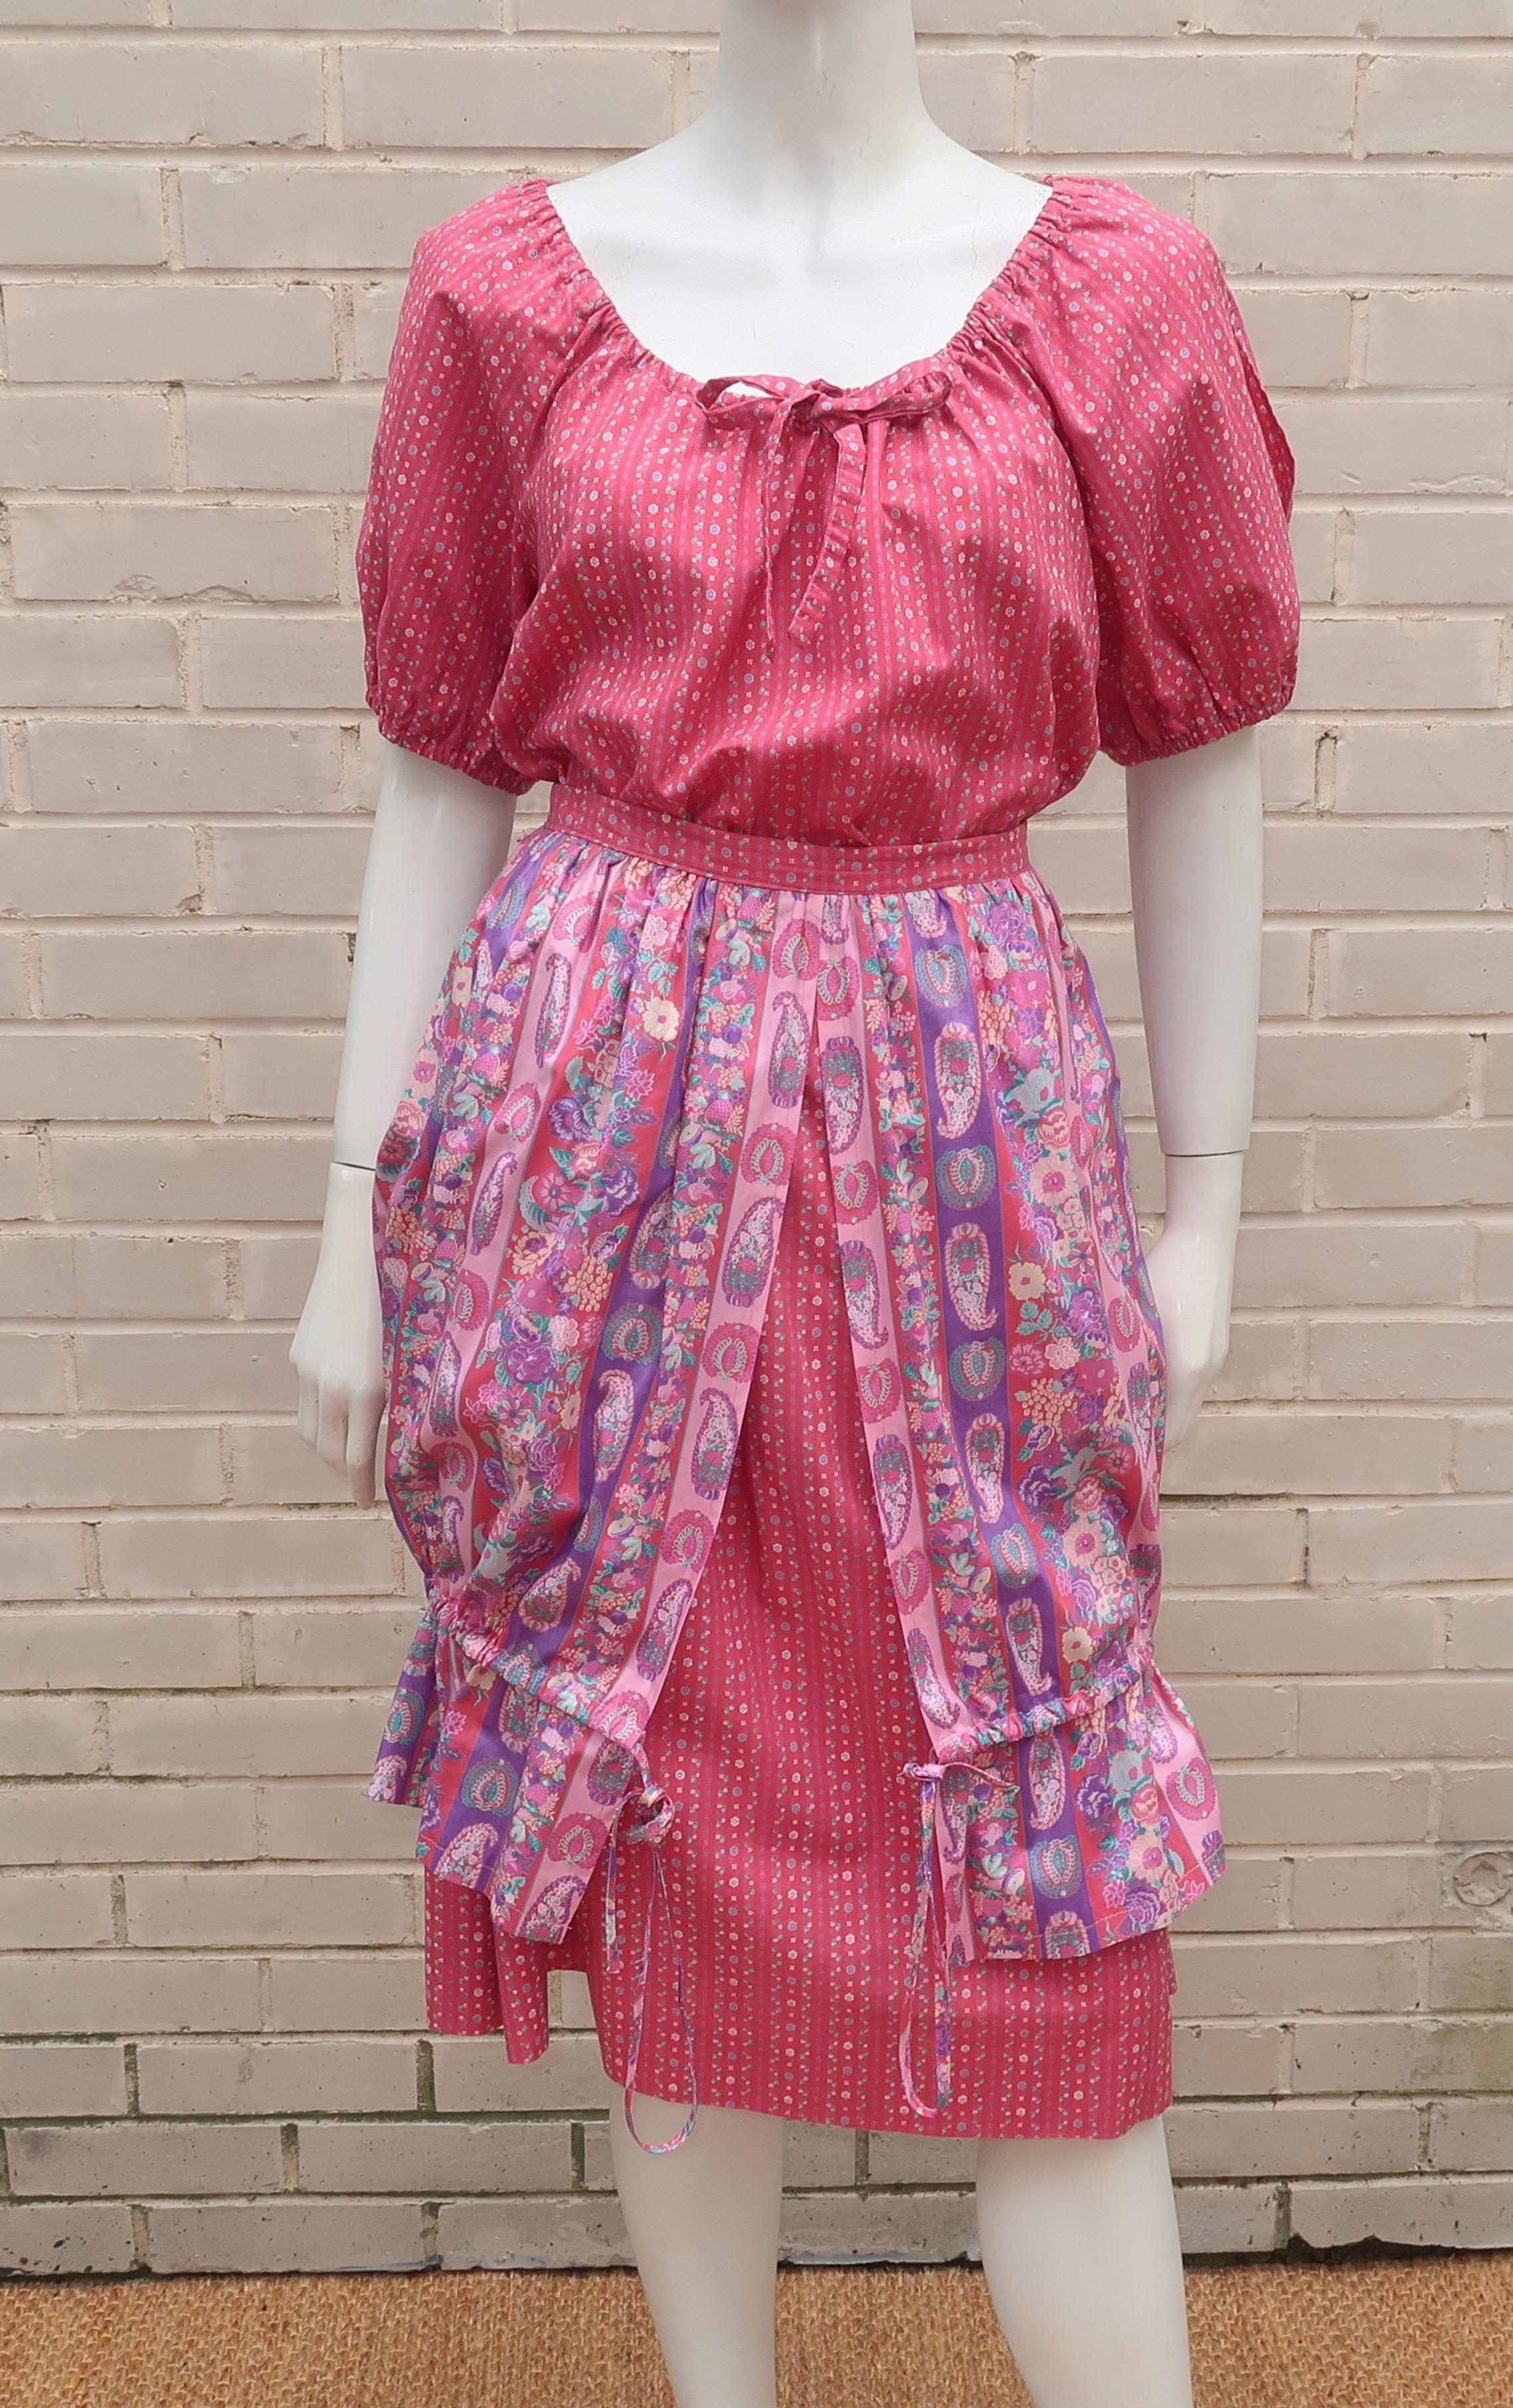 1970's floral cotton top and skirt by Jane Schaffhausen for her label Belle France.  The peasant style design includes a pullover top and two tiered skirt that zips at the side.  The top has vented puff sleeves and an elasticized collar with a faux